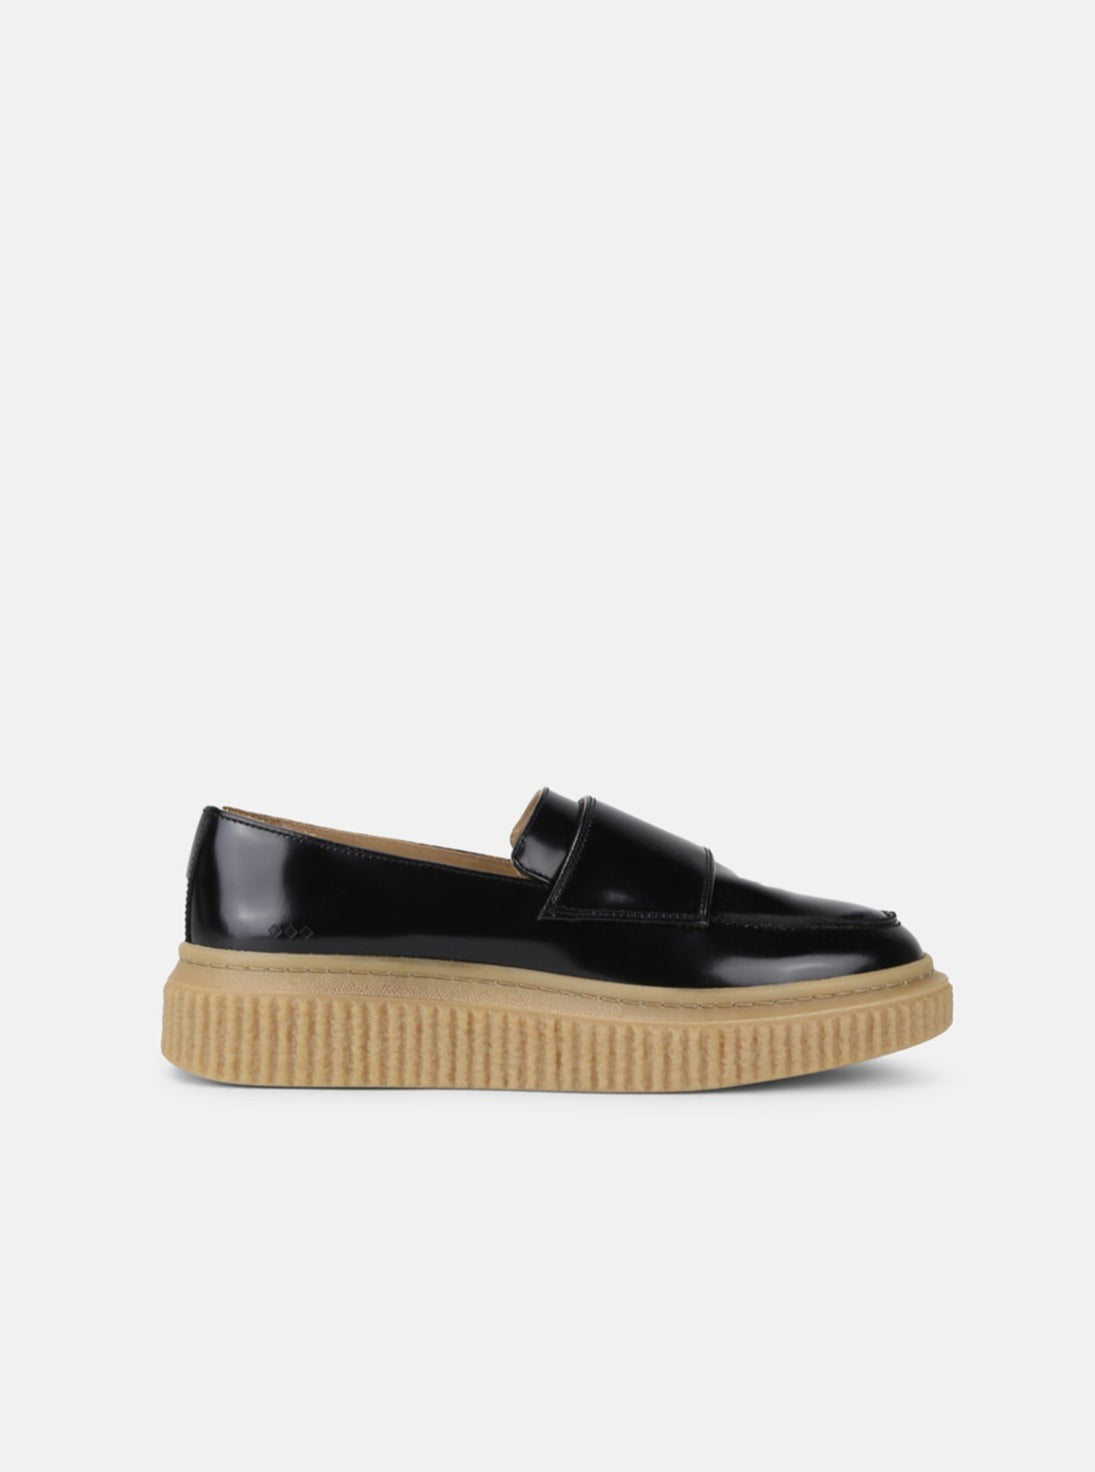 The Contour Polido Loafer from ROYAL REPUBLIC